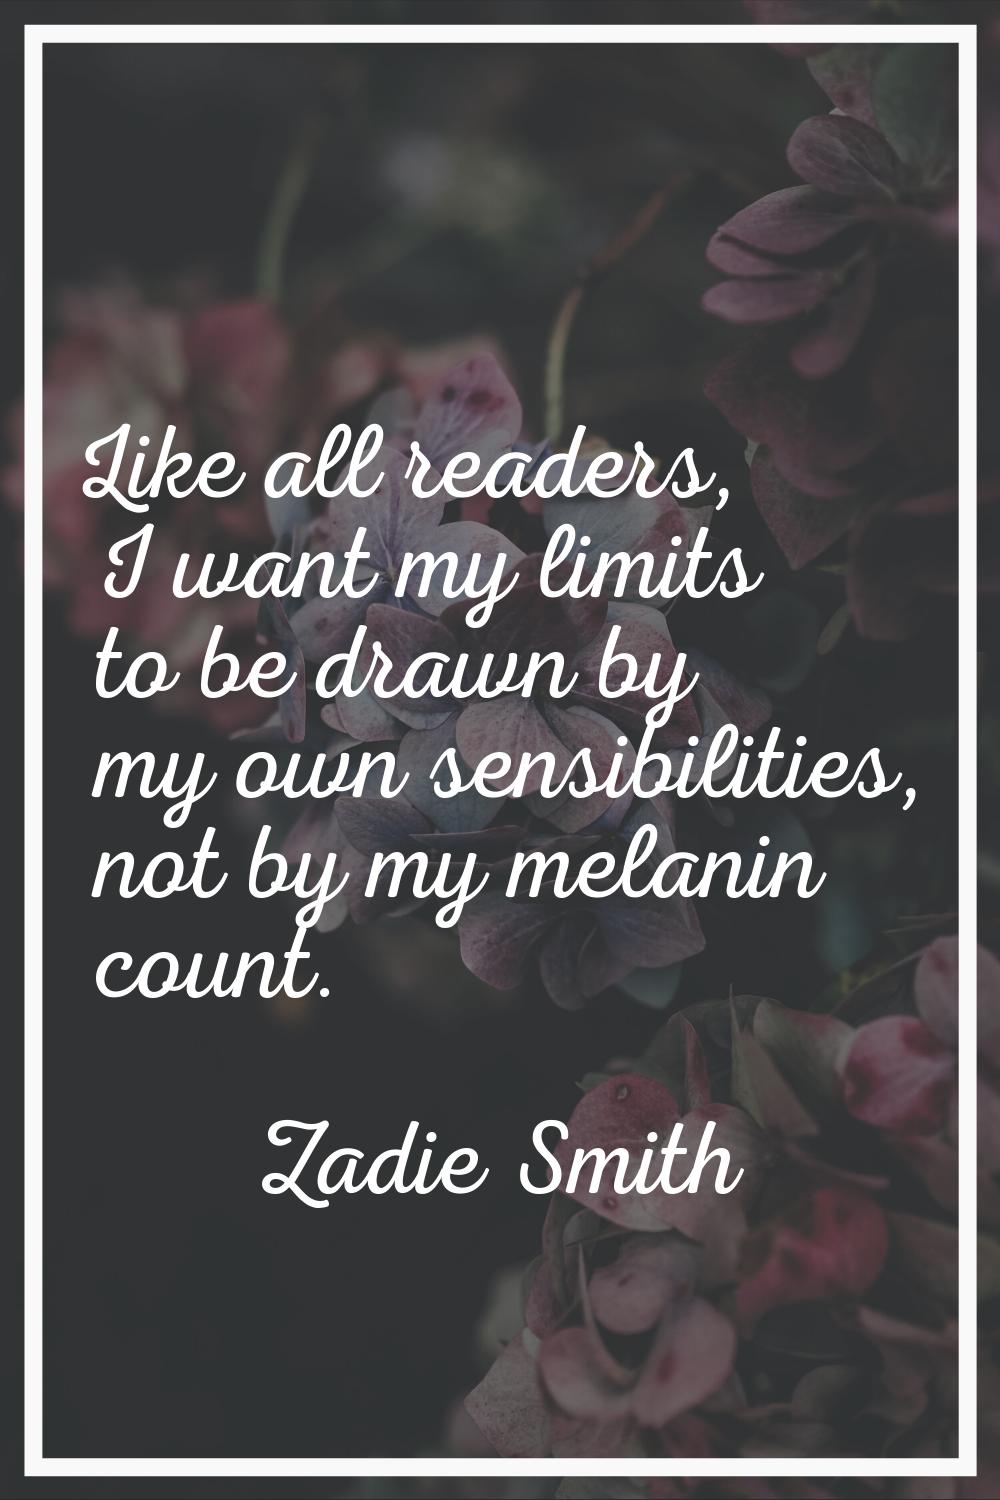 Like all readers, I want my limits to be drawn by my own sensibilities, not by my melanin count.